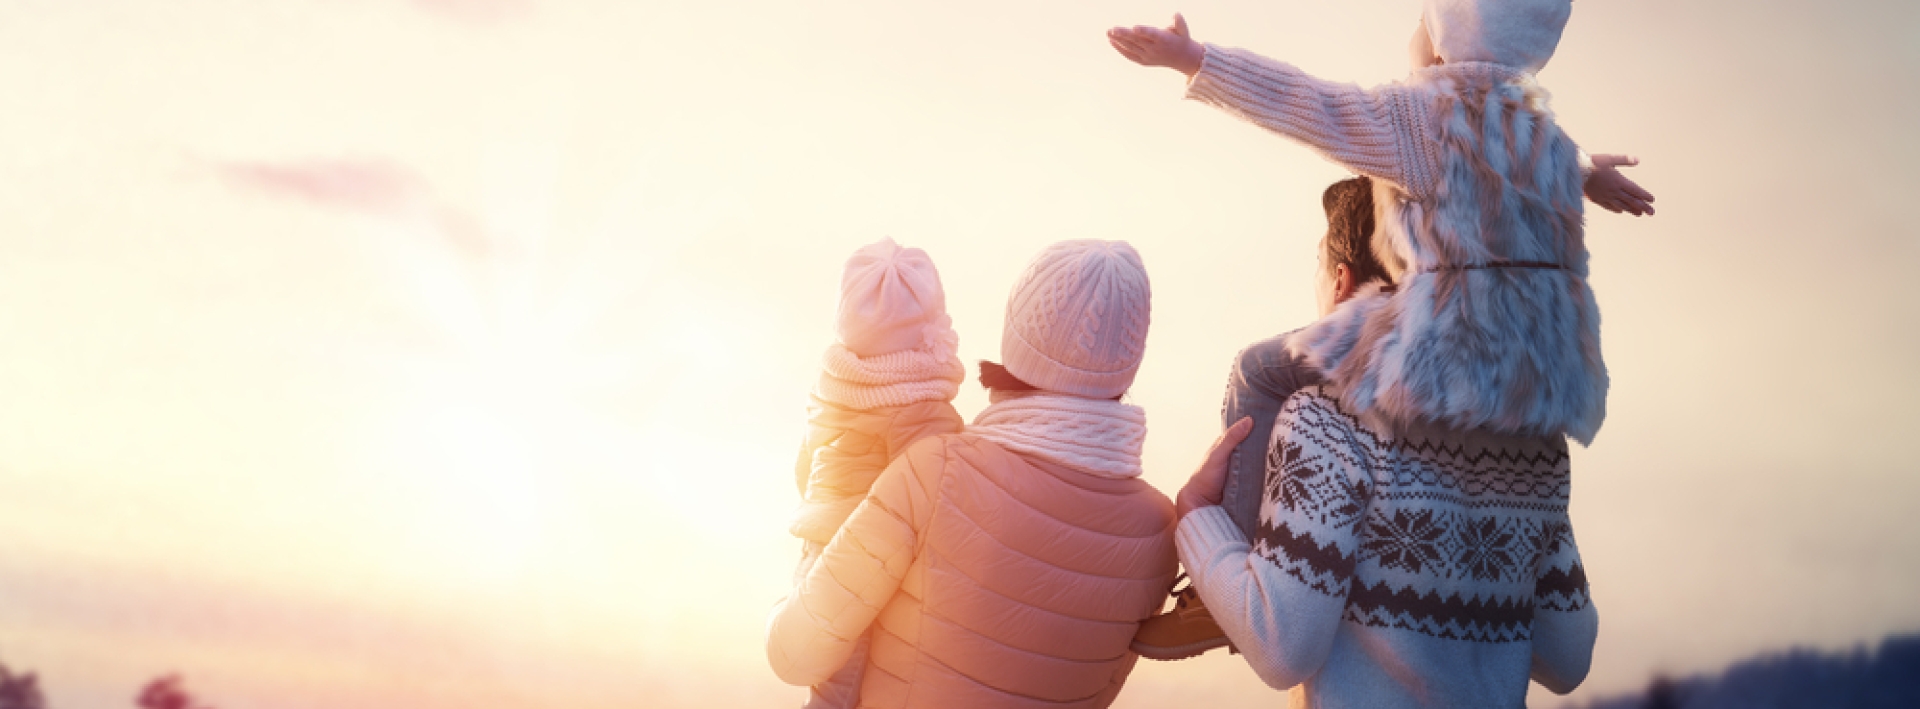 Couple holding two kids, one in fathers should spreading her arms as the sun hits them all.